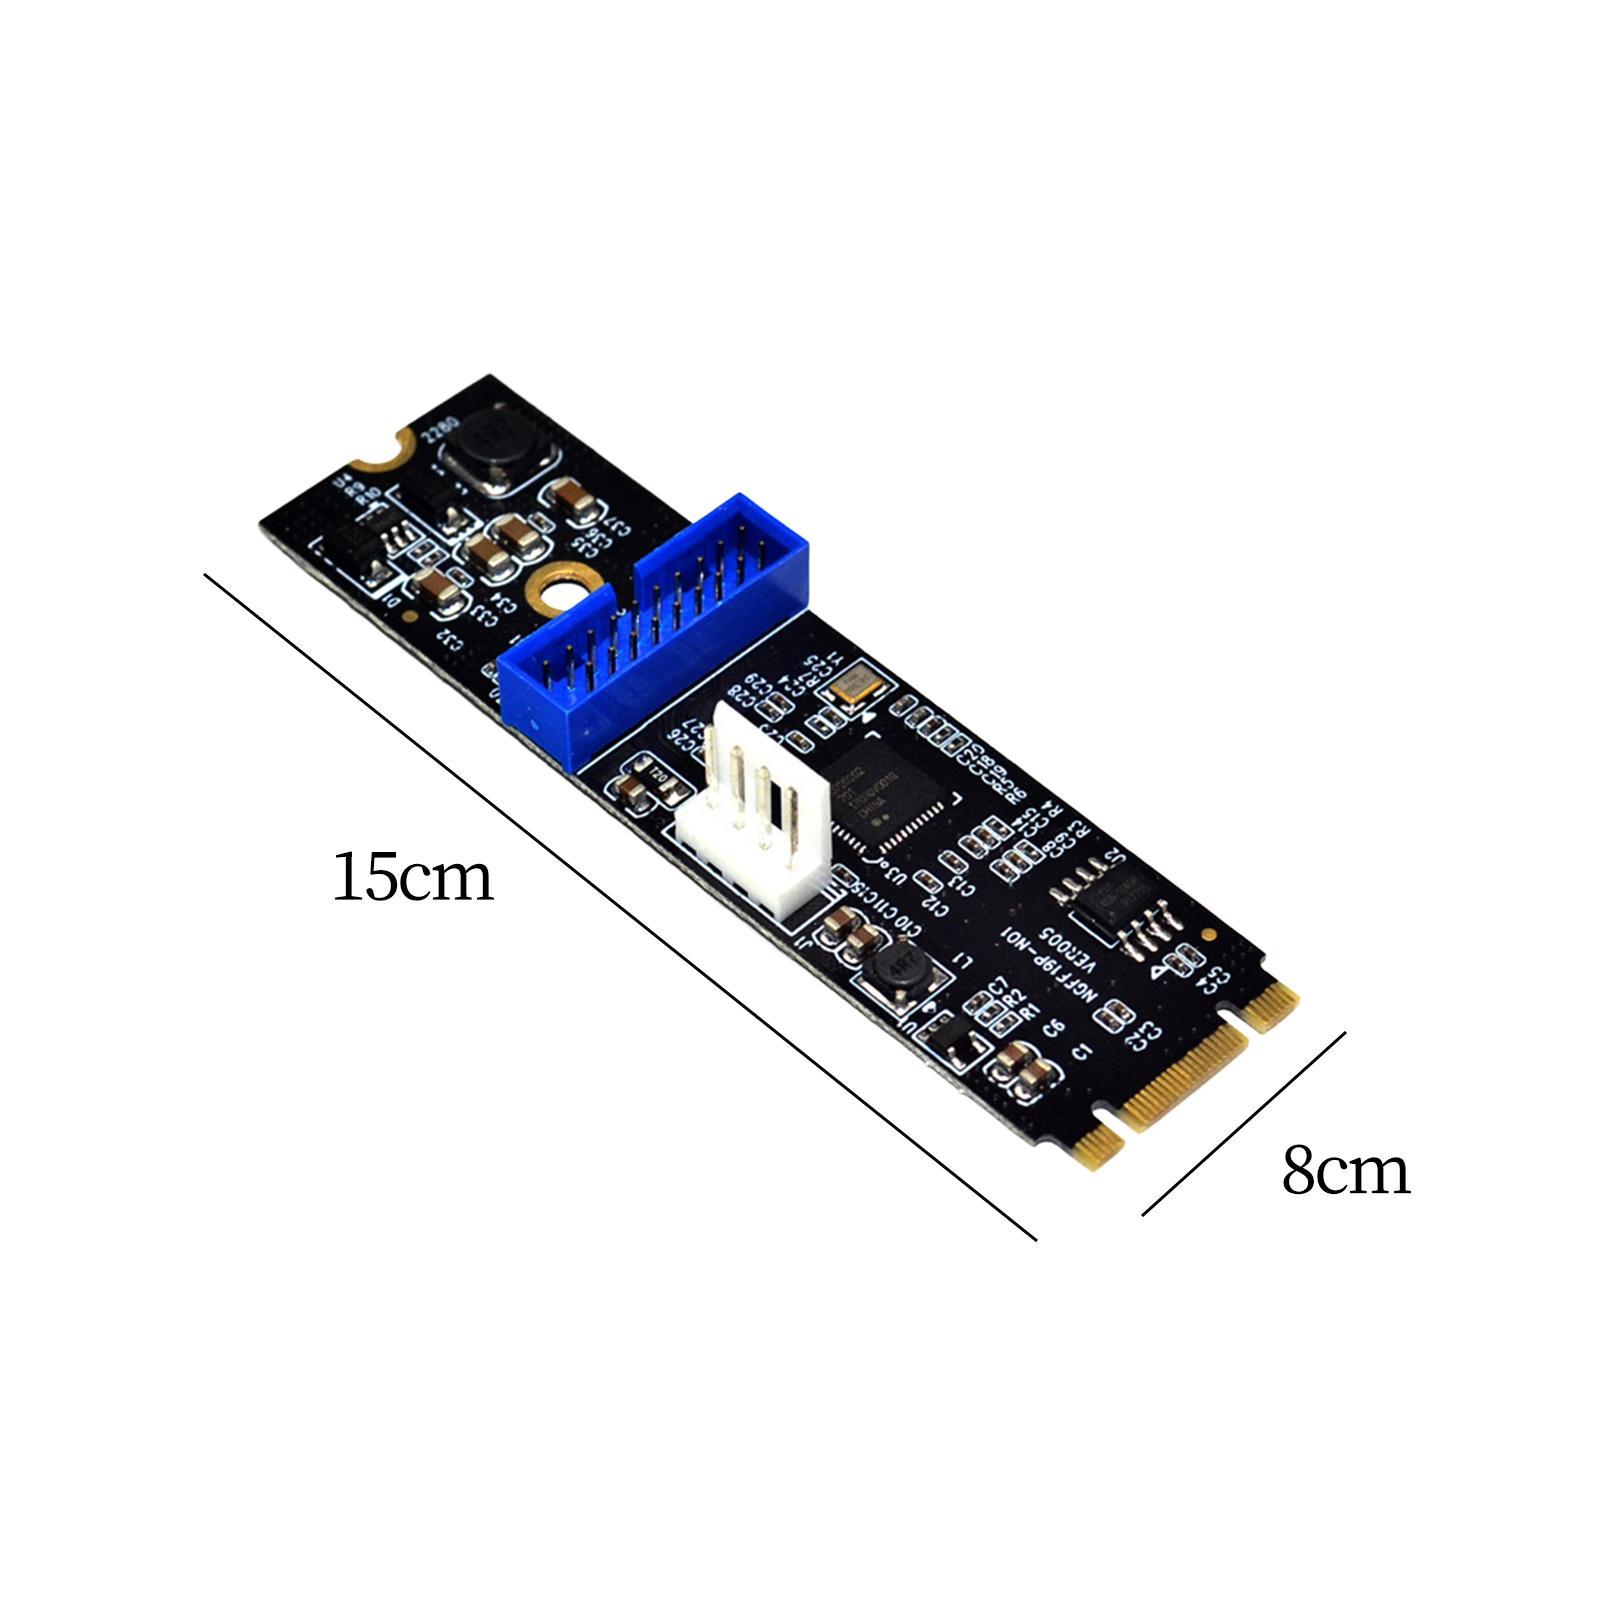 M.2   to USB 3.0 Front 19 Pin Adapter Card Expansion Card 2 Ports USB 3.0 Transfer Card Converter for Desktop Motherboard Computer